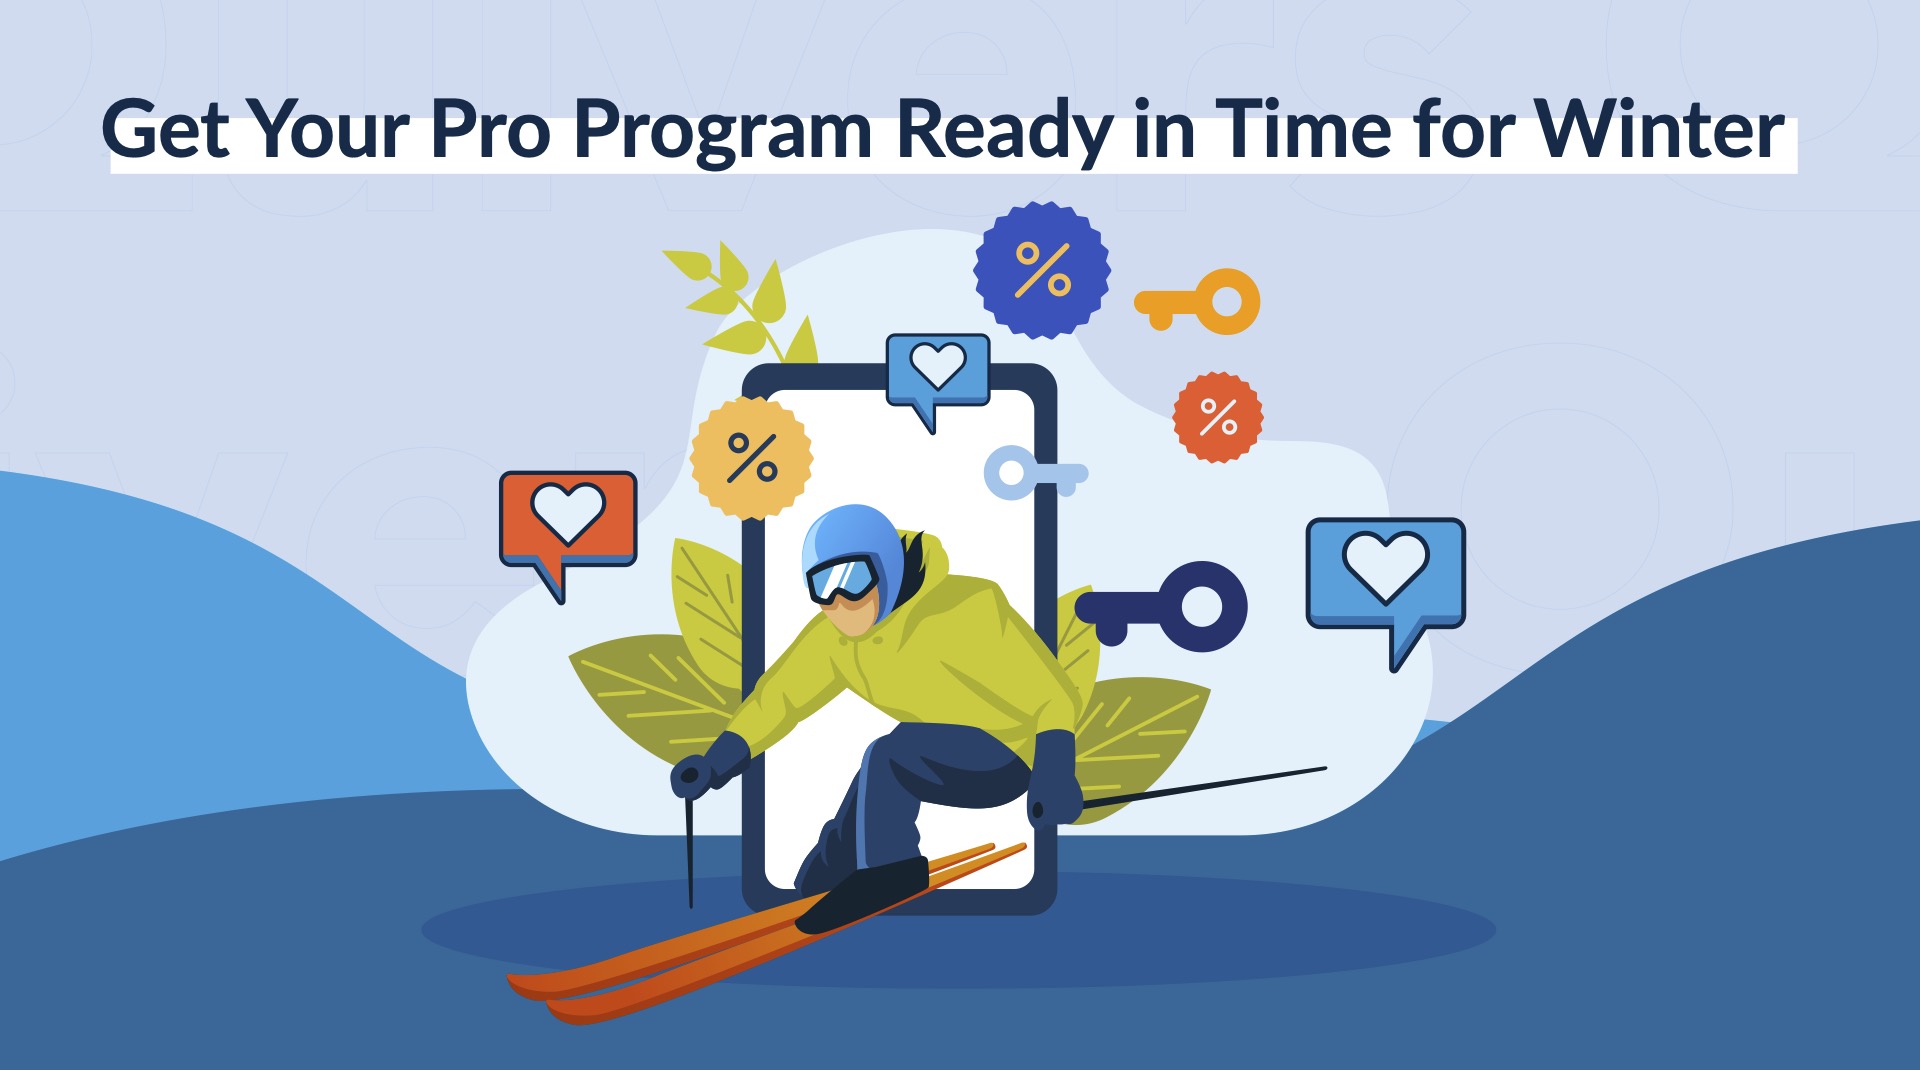 Get Your Pro Program Ready in Time for Winter